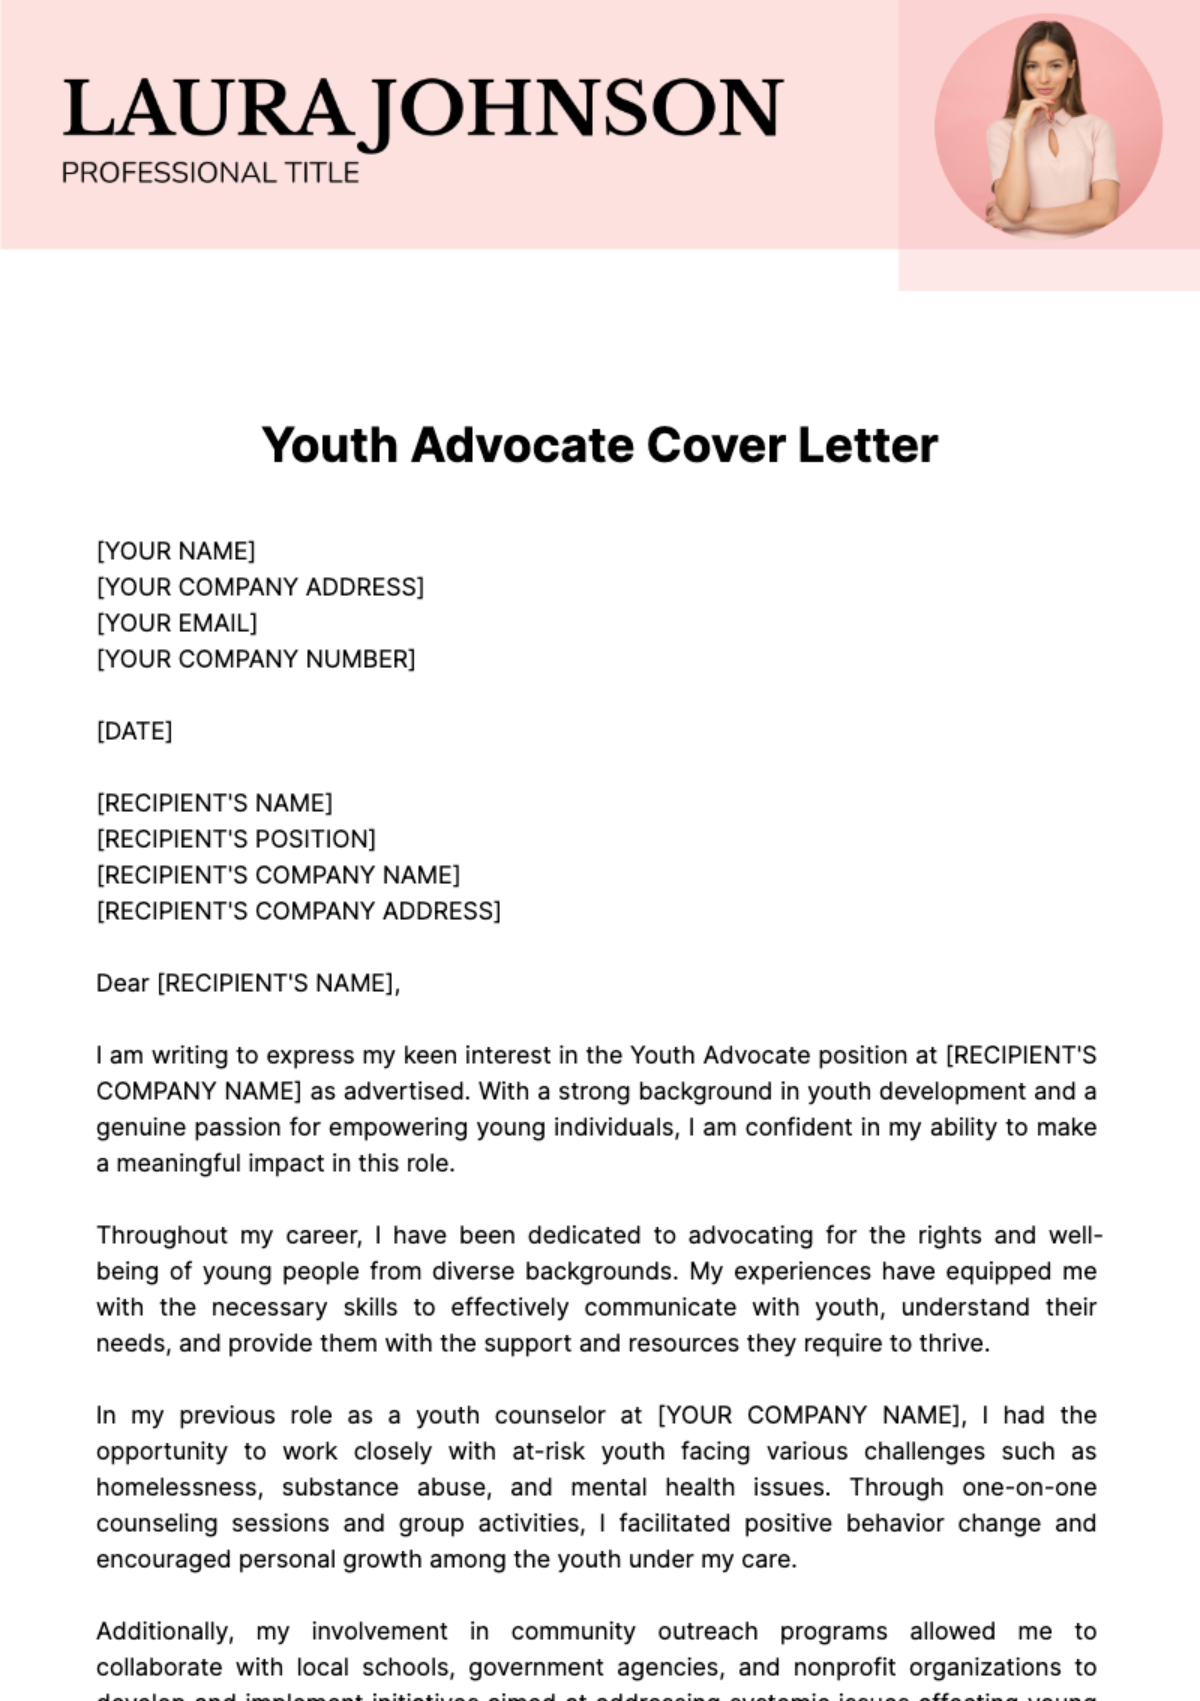 Youth Advocate Cover Letter Template